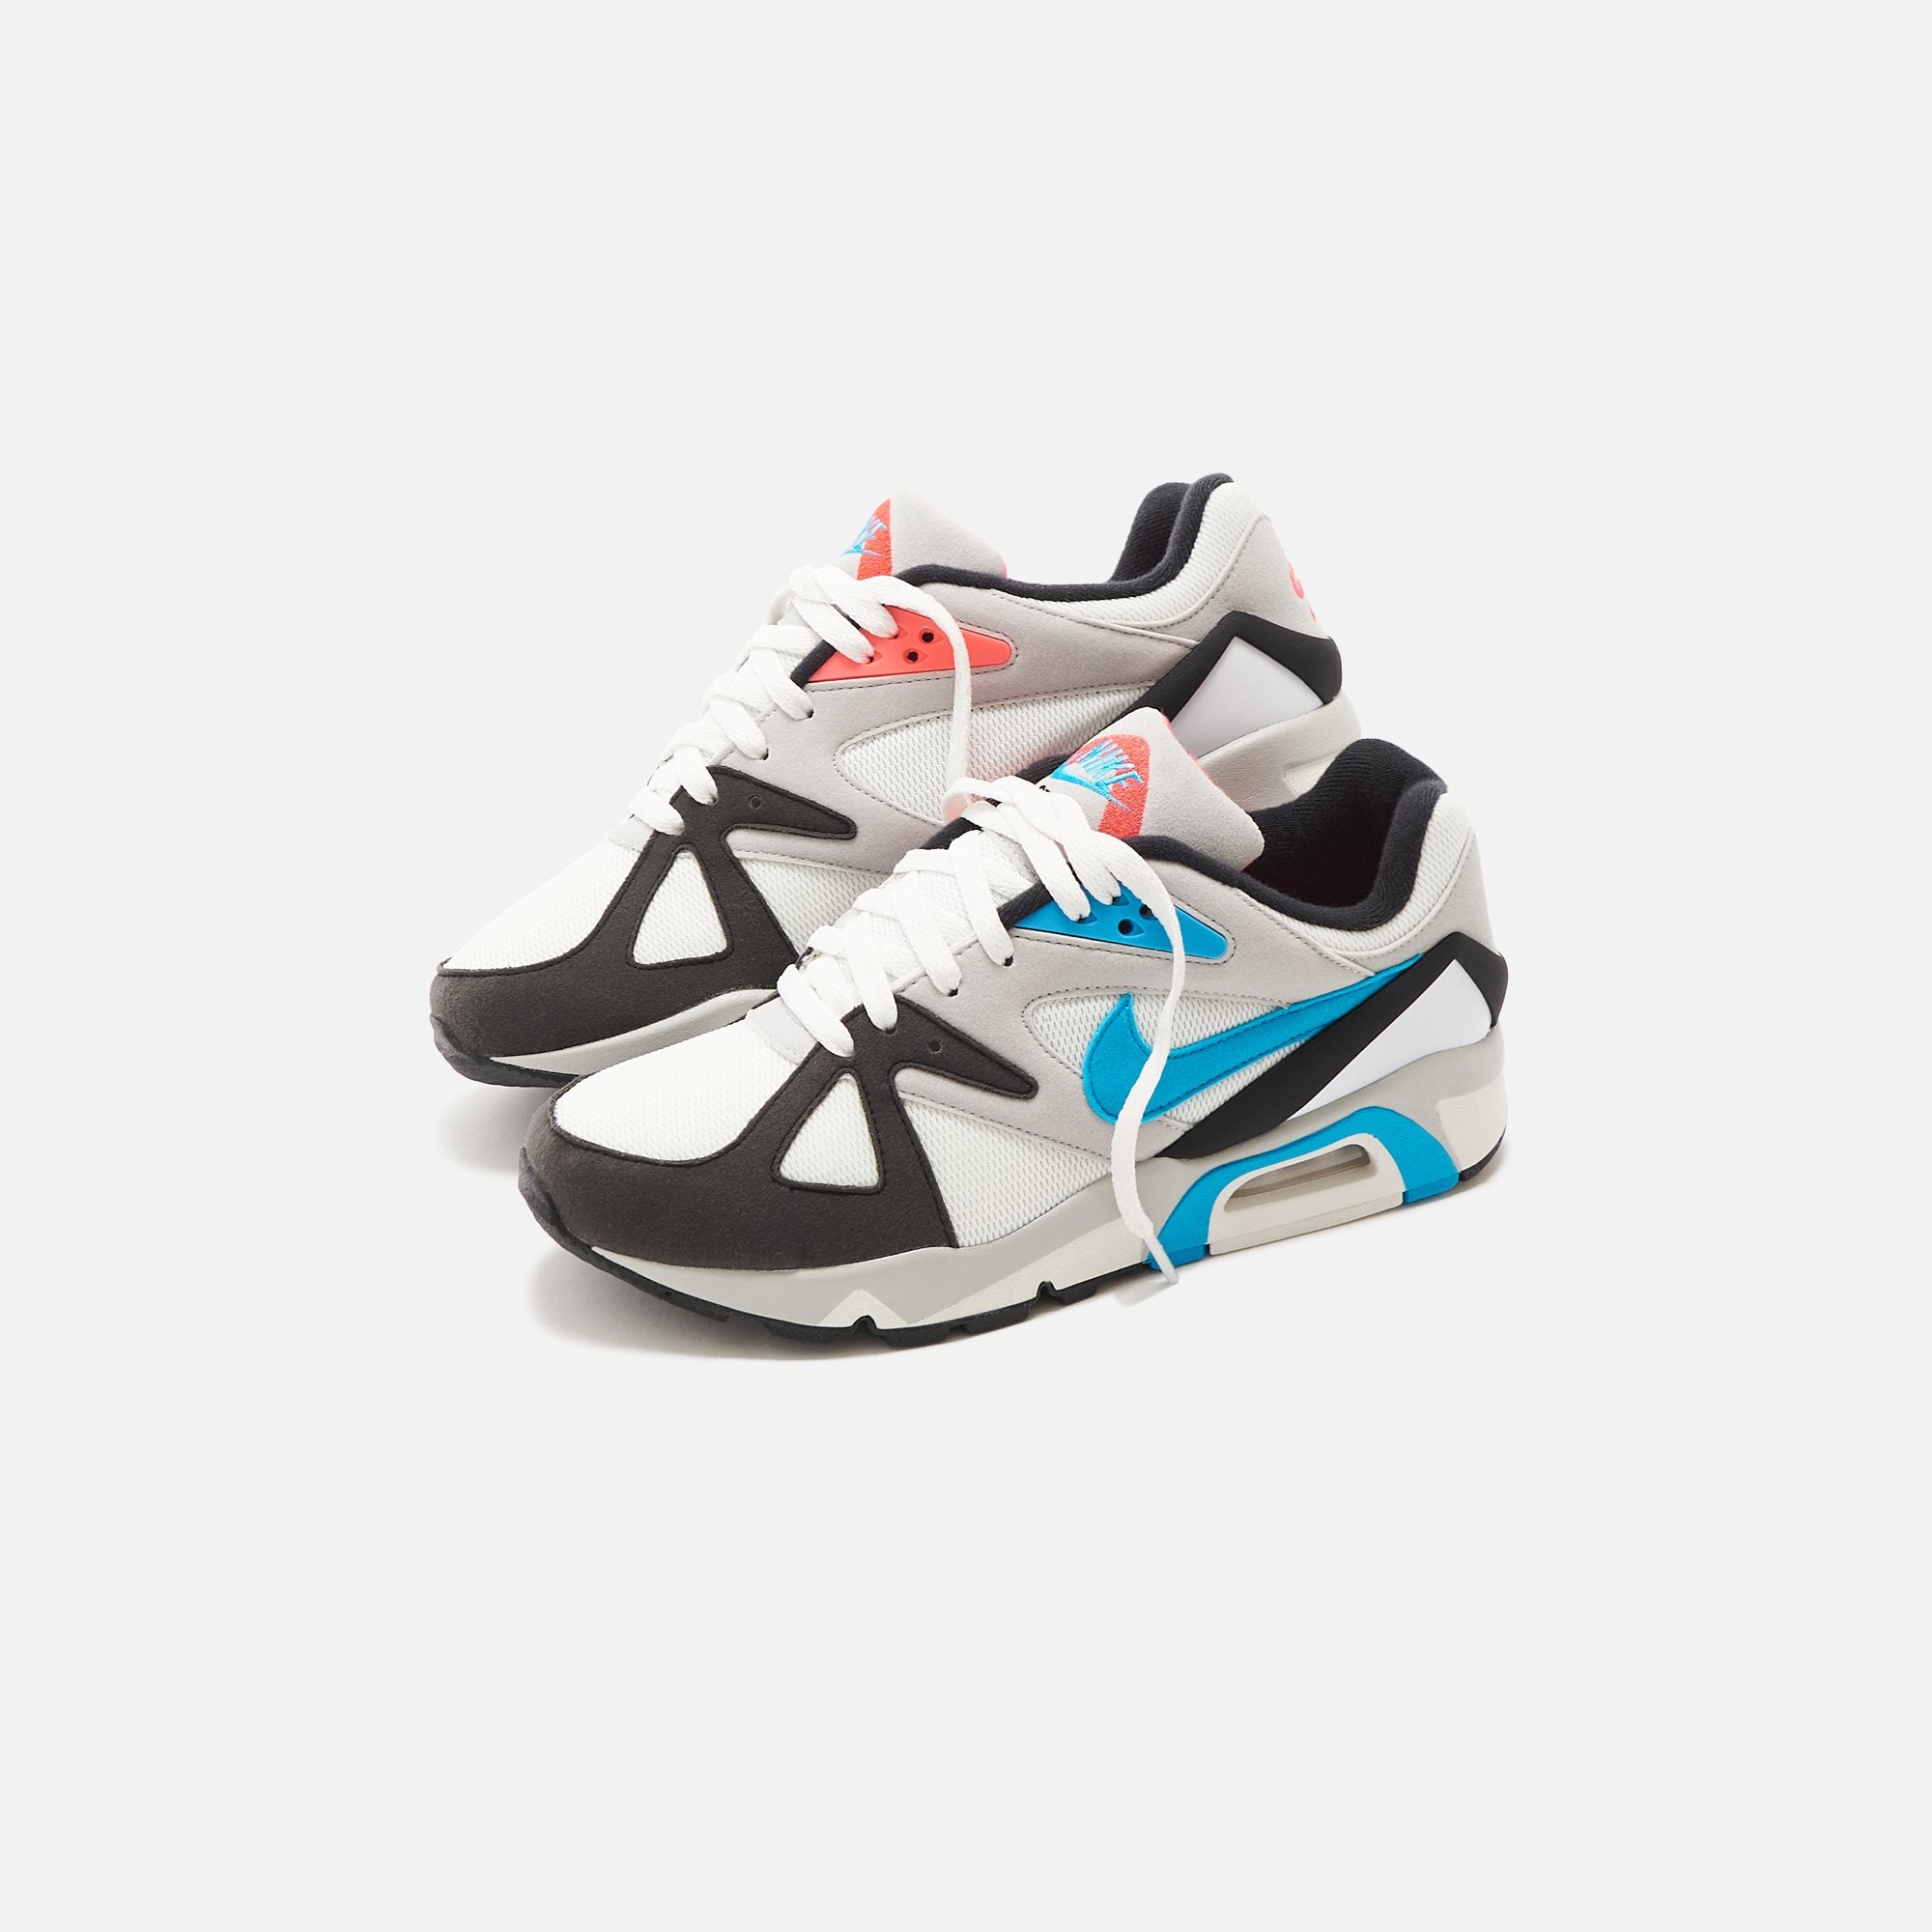 Normalisering Fare Øde Nike Air Max Structure - White / Neo Teal / Black / Infrared – Kith